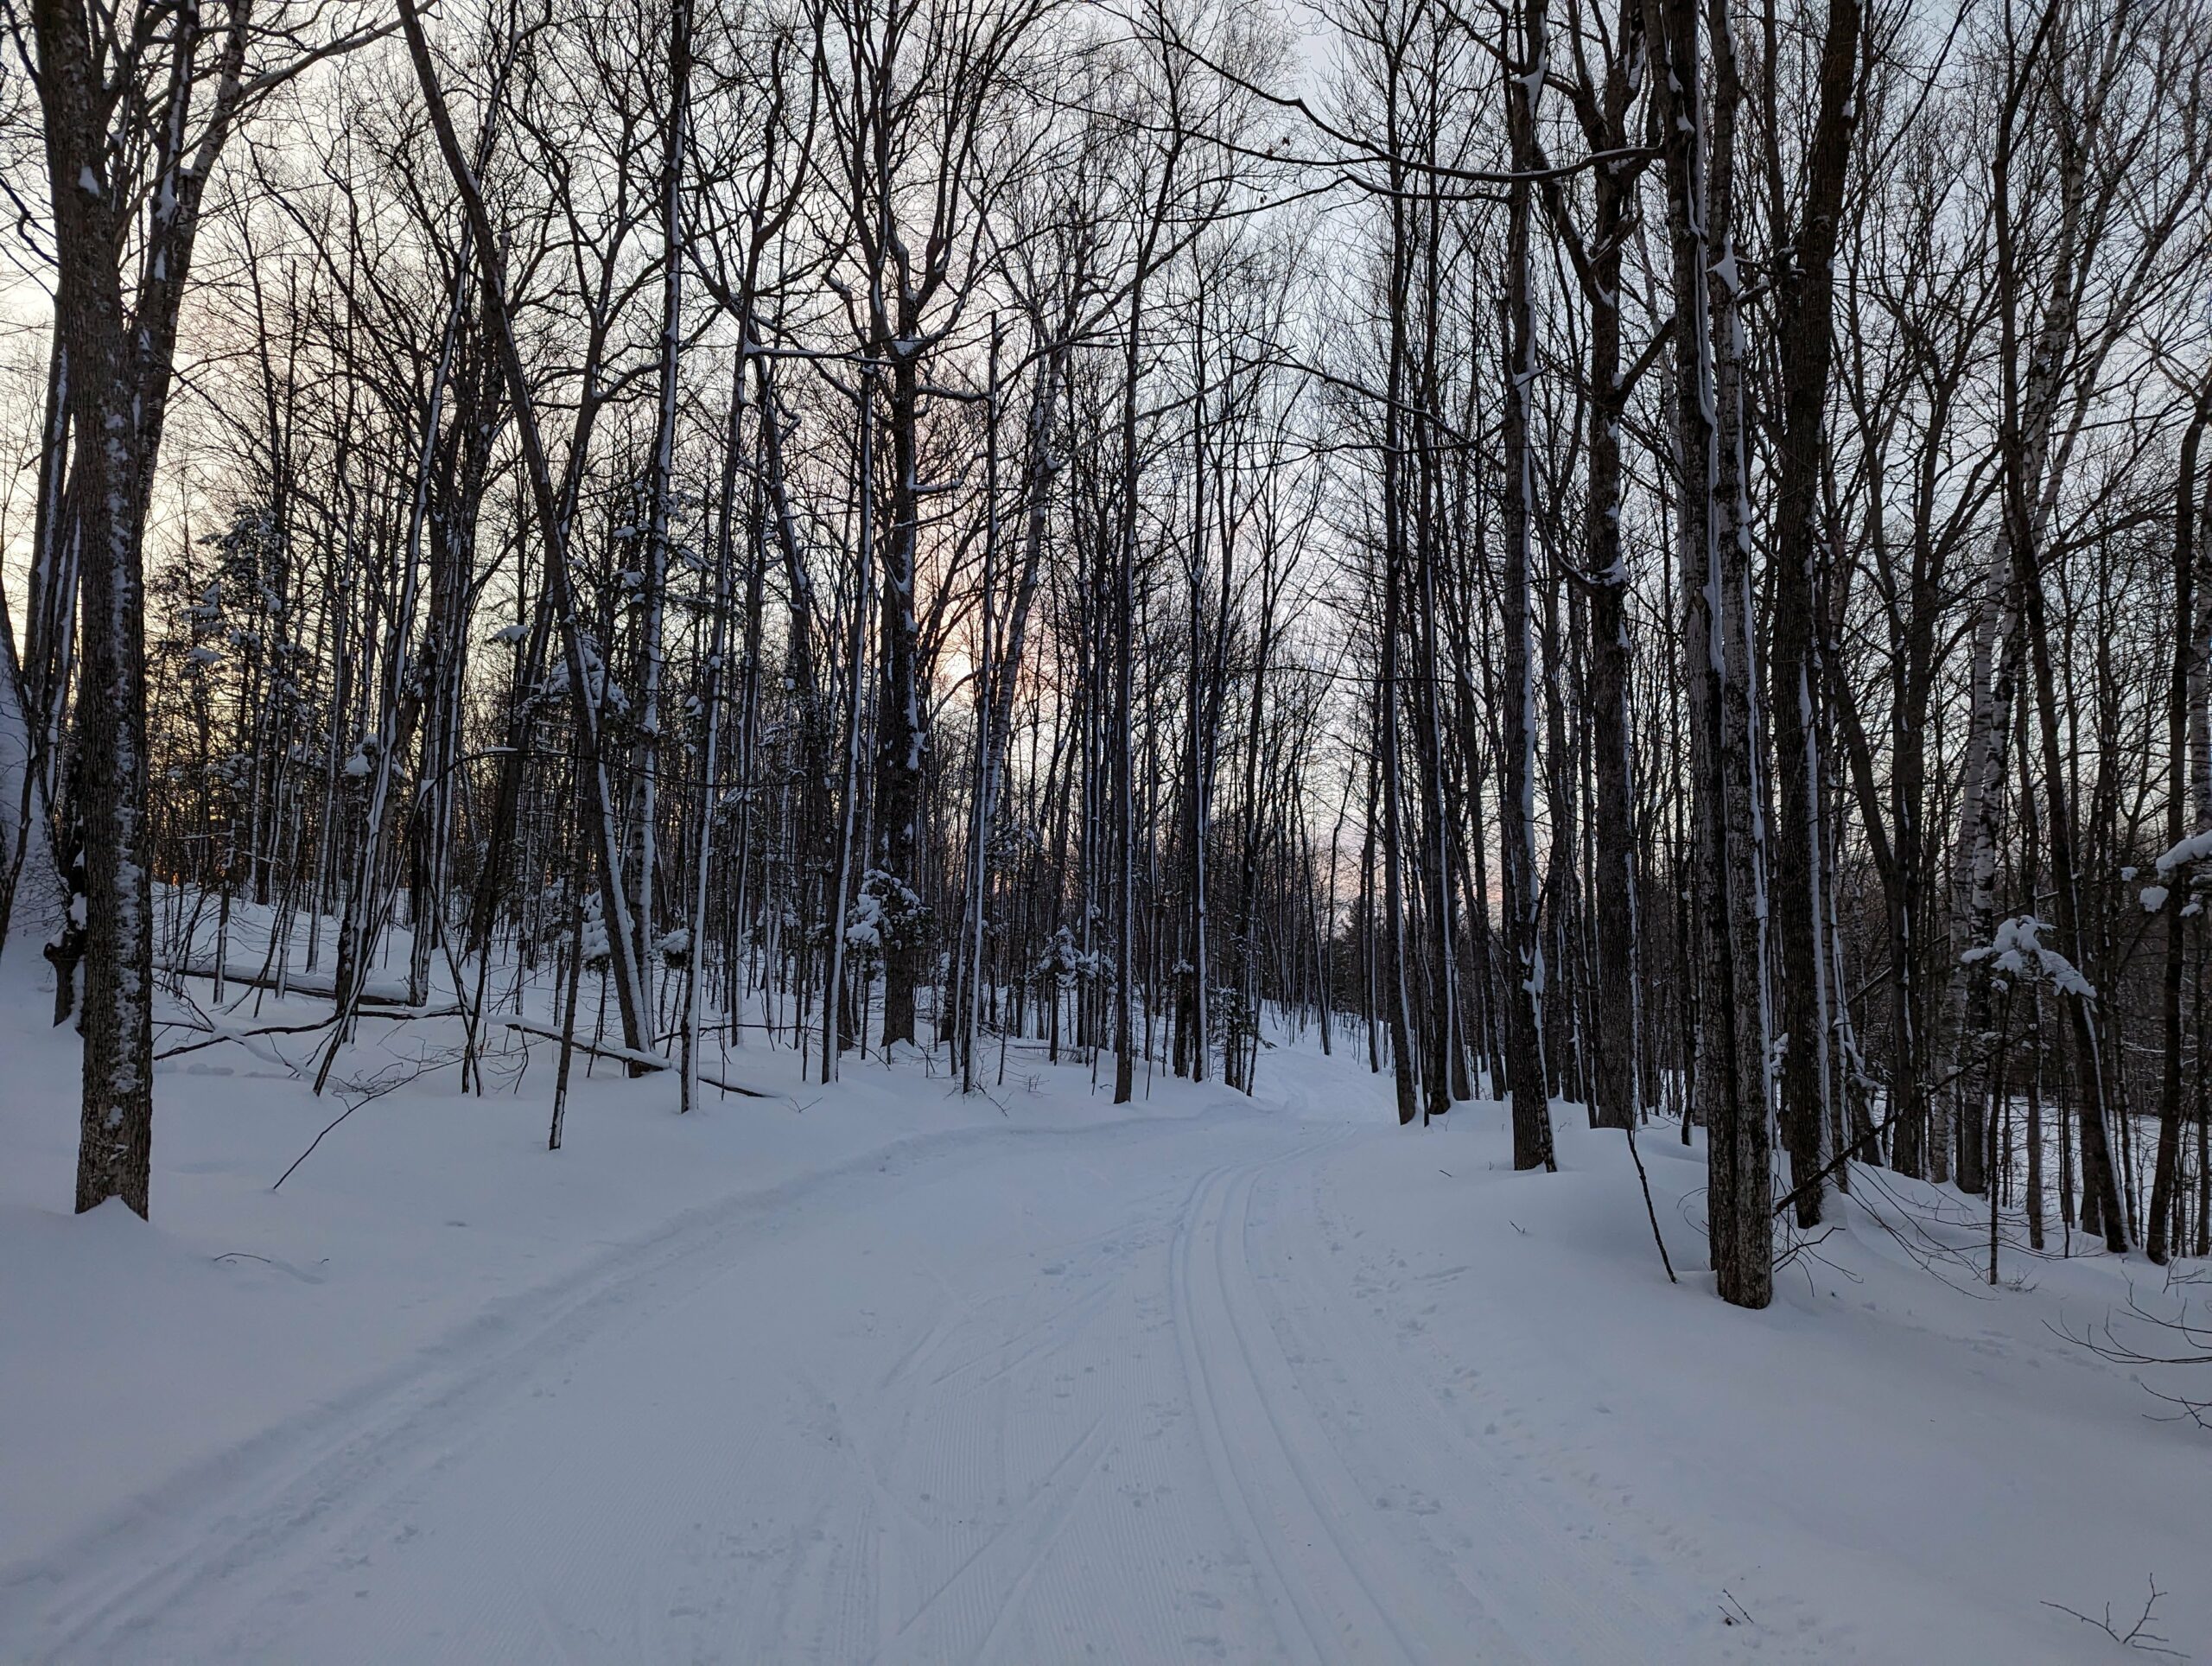 Cross country ski trail through the woods groomed for both classic and skate. The sun is setting in the distance.